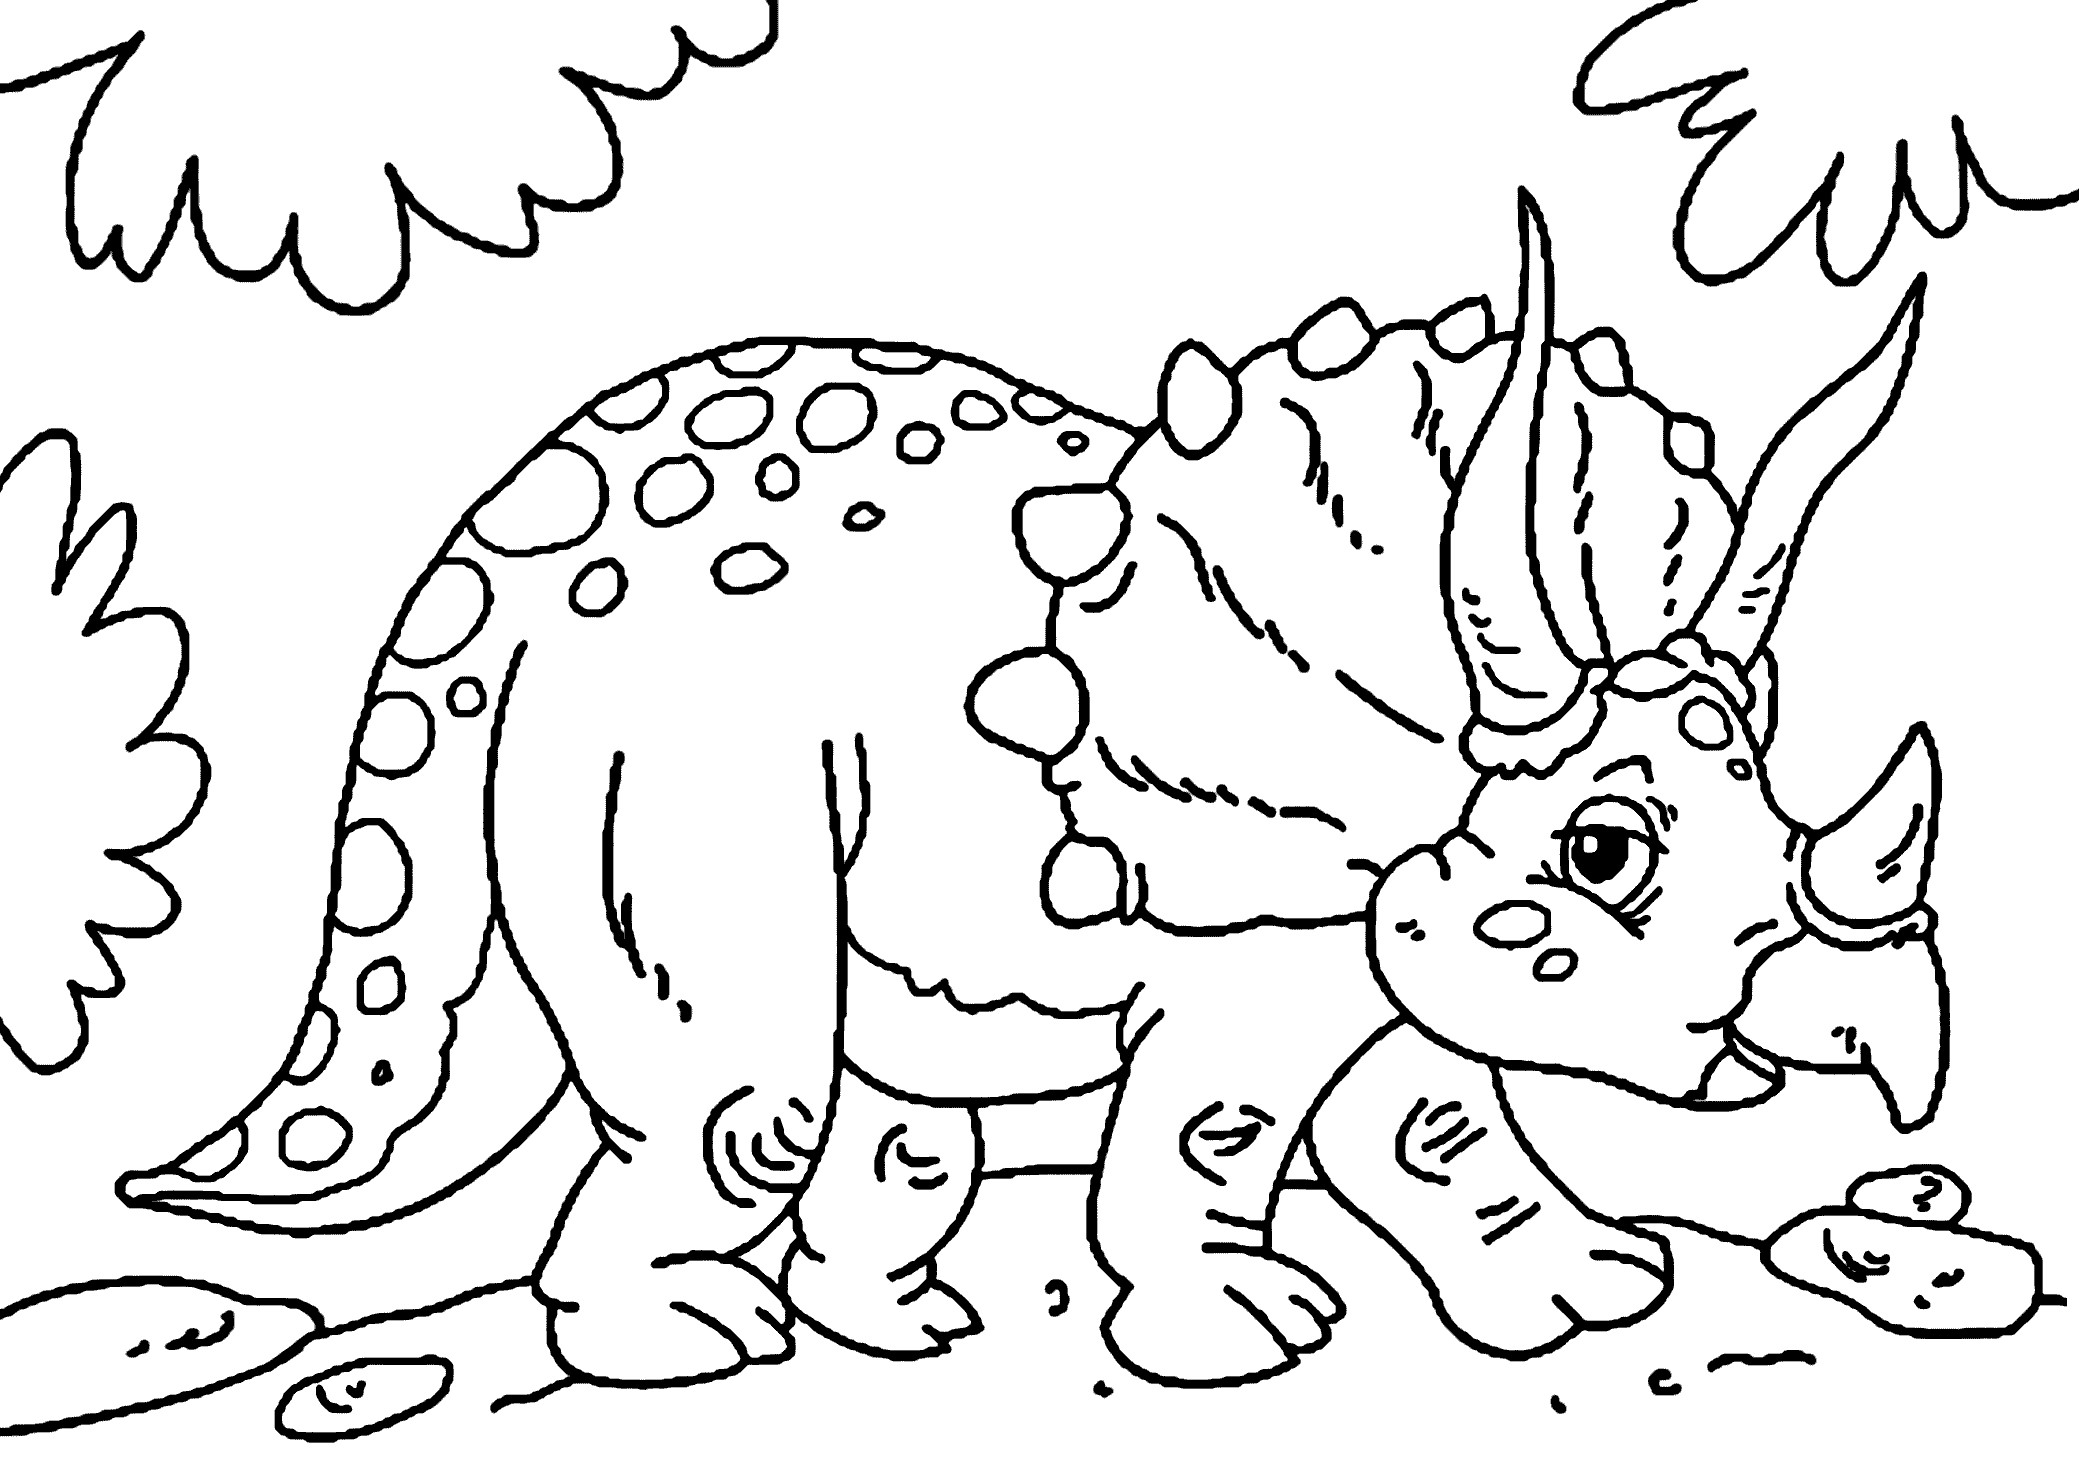 Dinosaur Printable Coloring Pages
 Cute little triceratops dinosaur coloring pages for kids